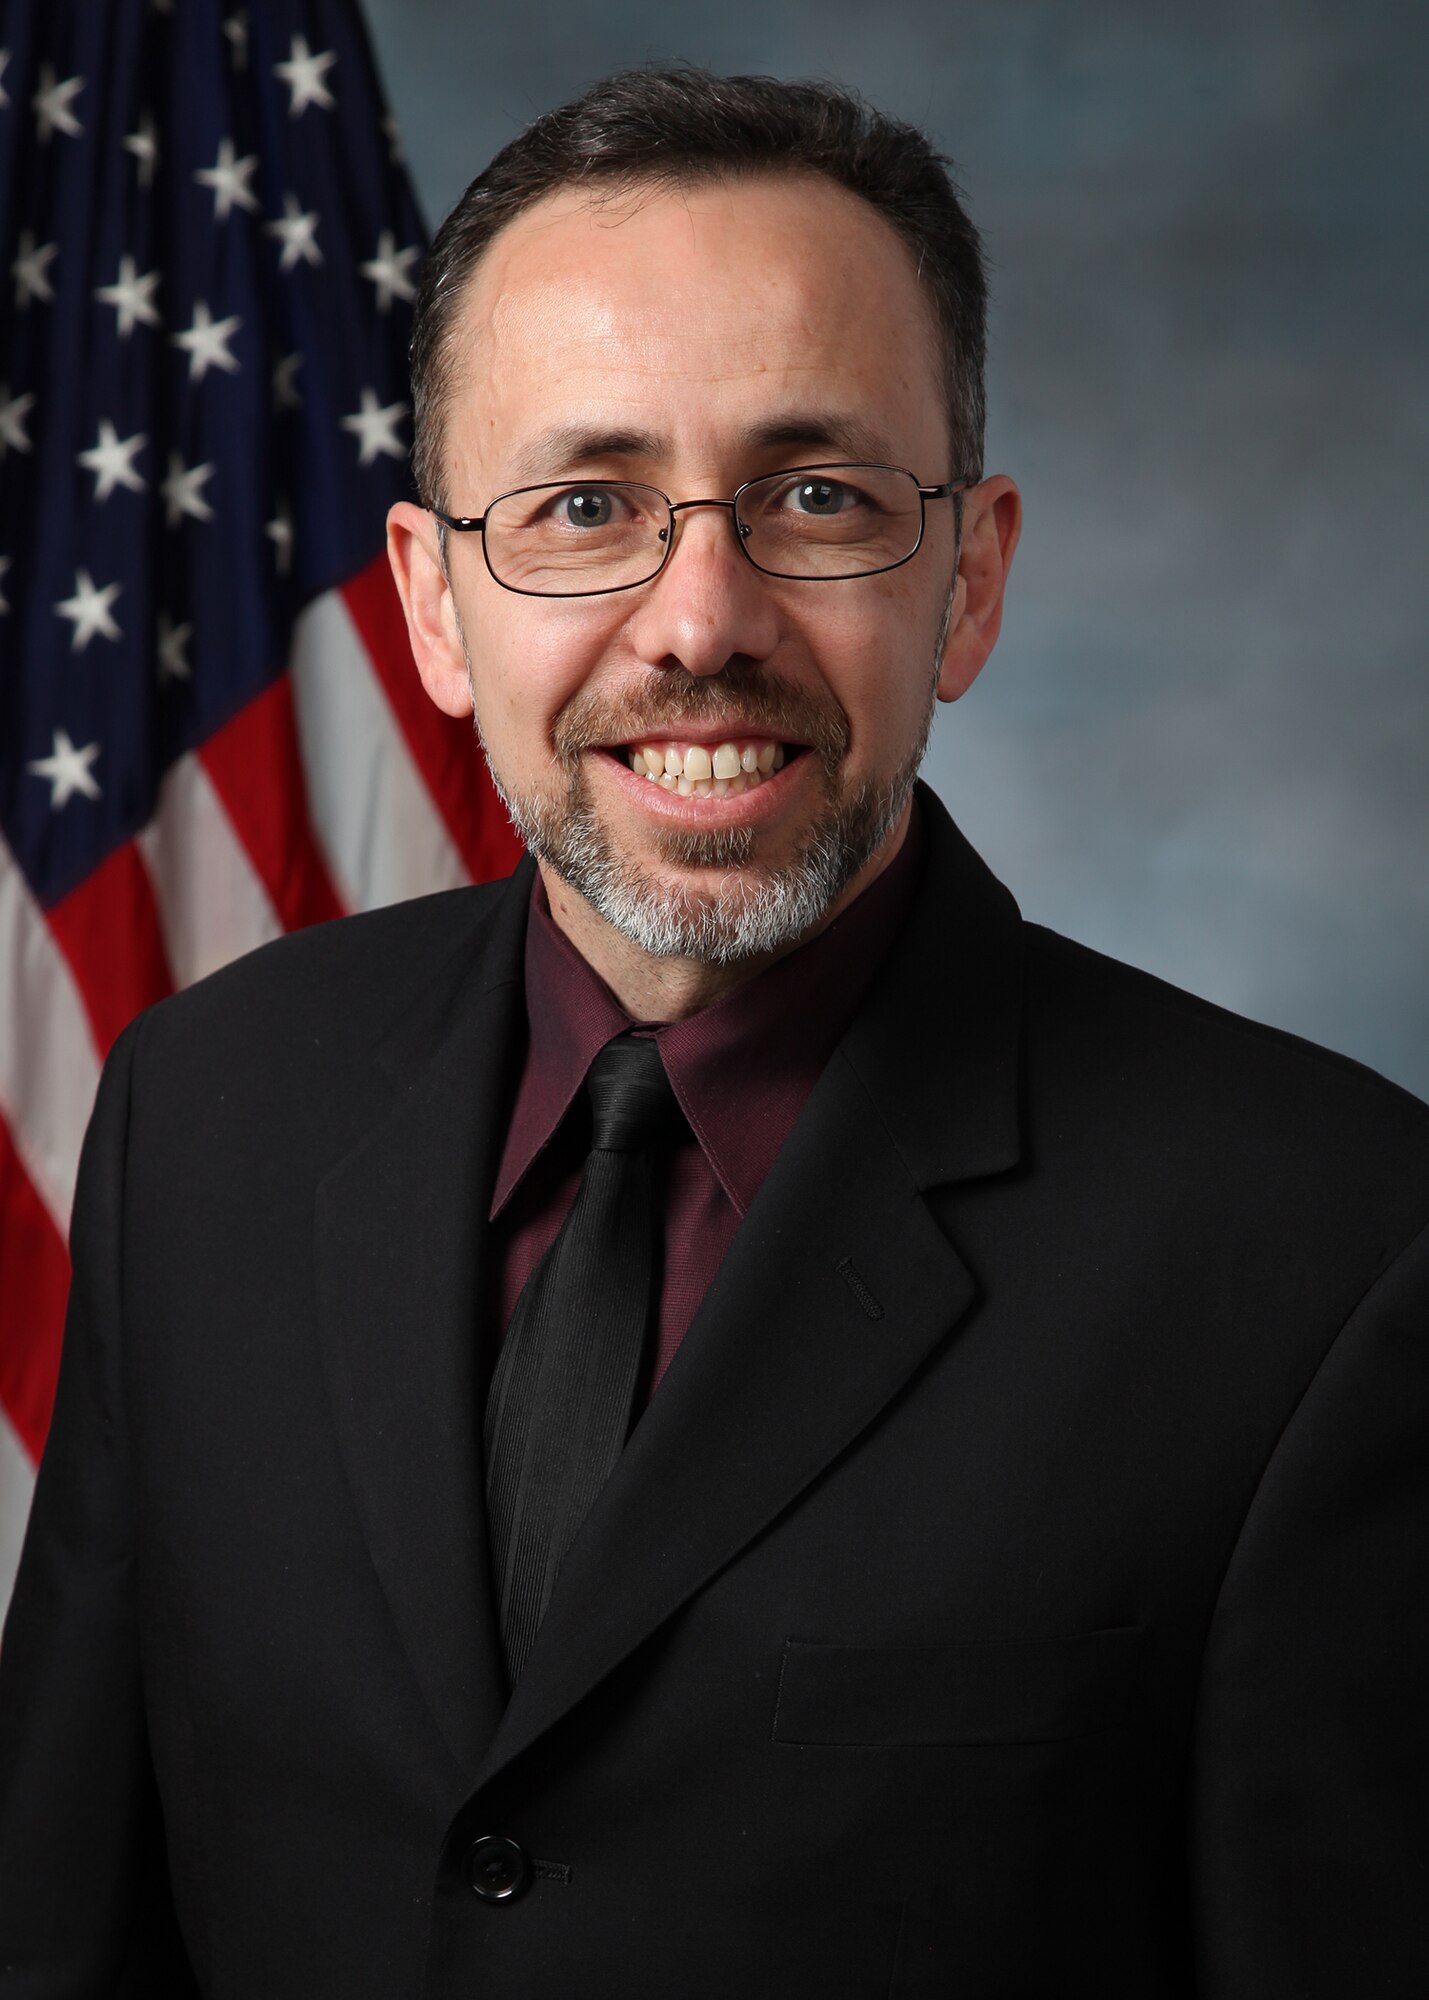 Air Force Nuclear Weapons Center Executive Director Joseph Order